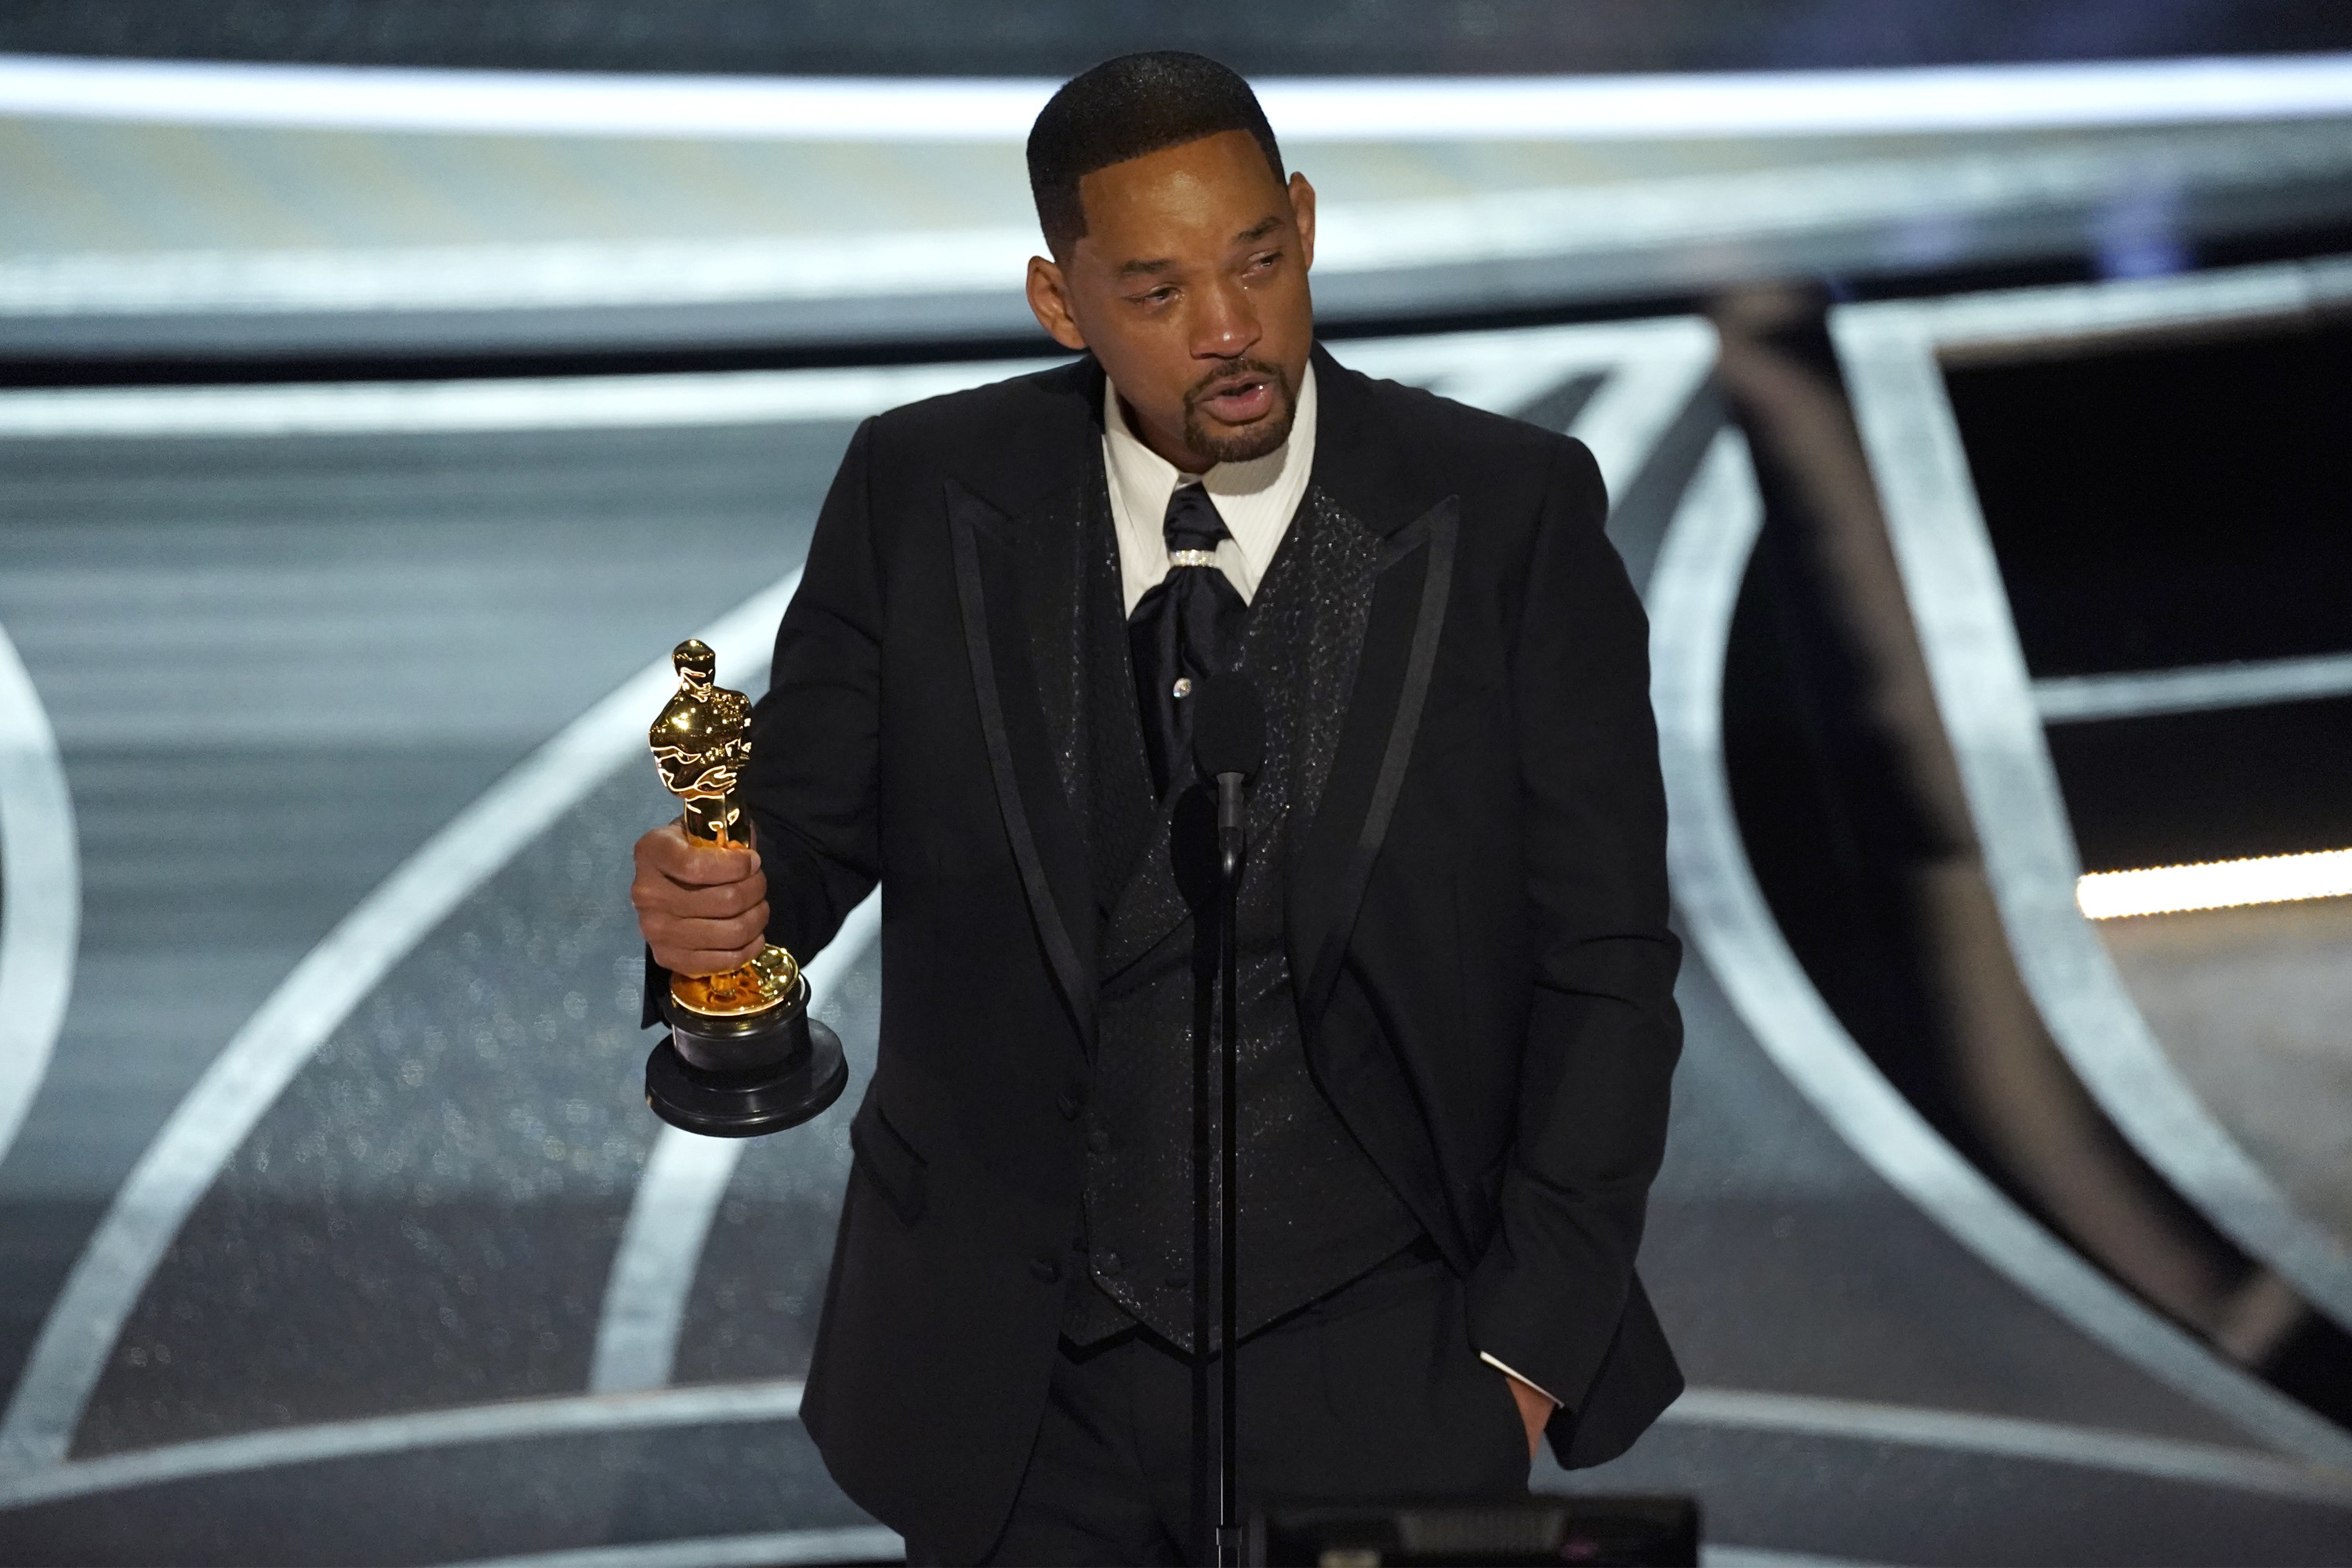 Will Smith tearfully accepts the Oscar for Best Actor.